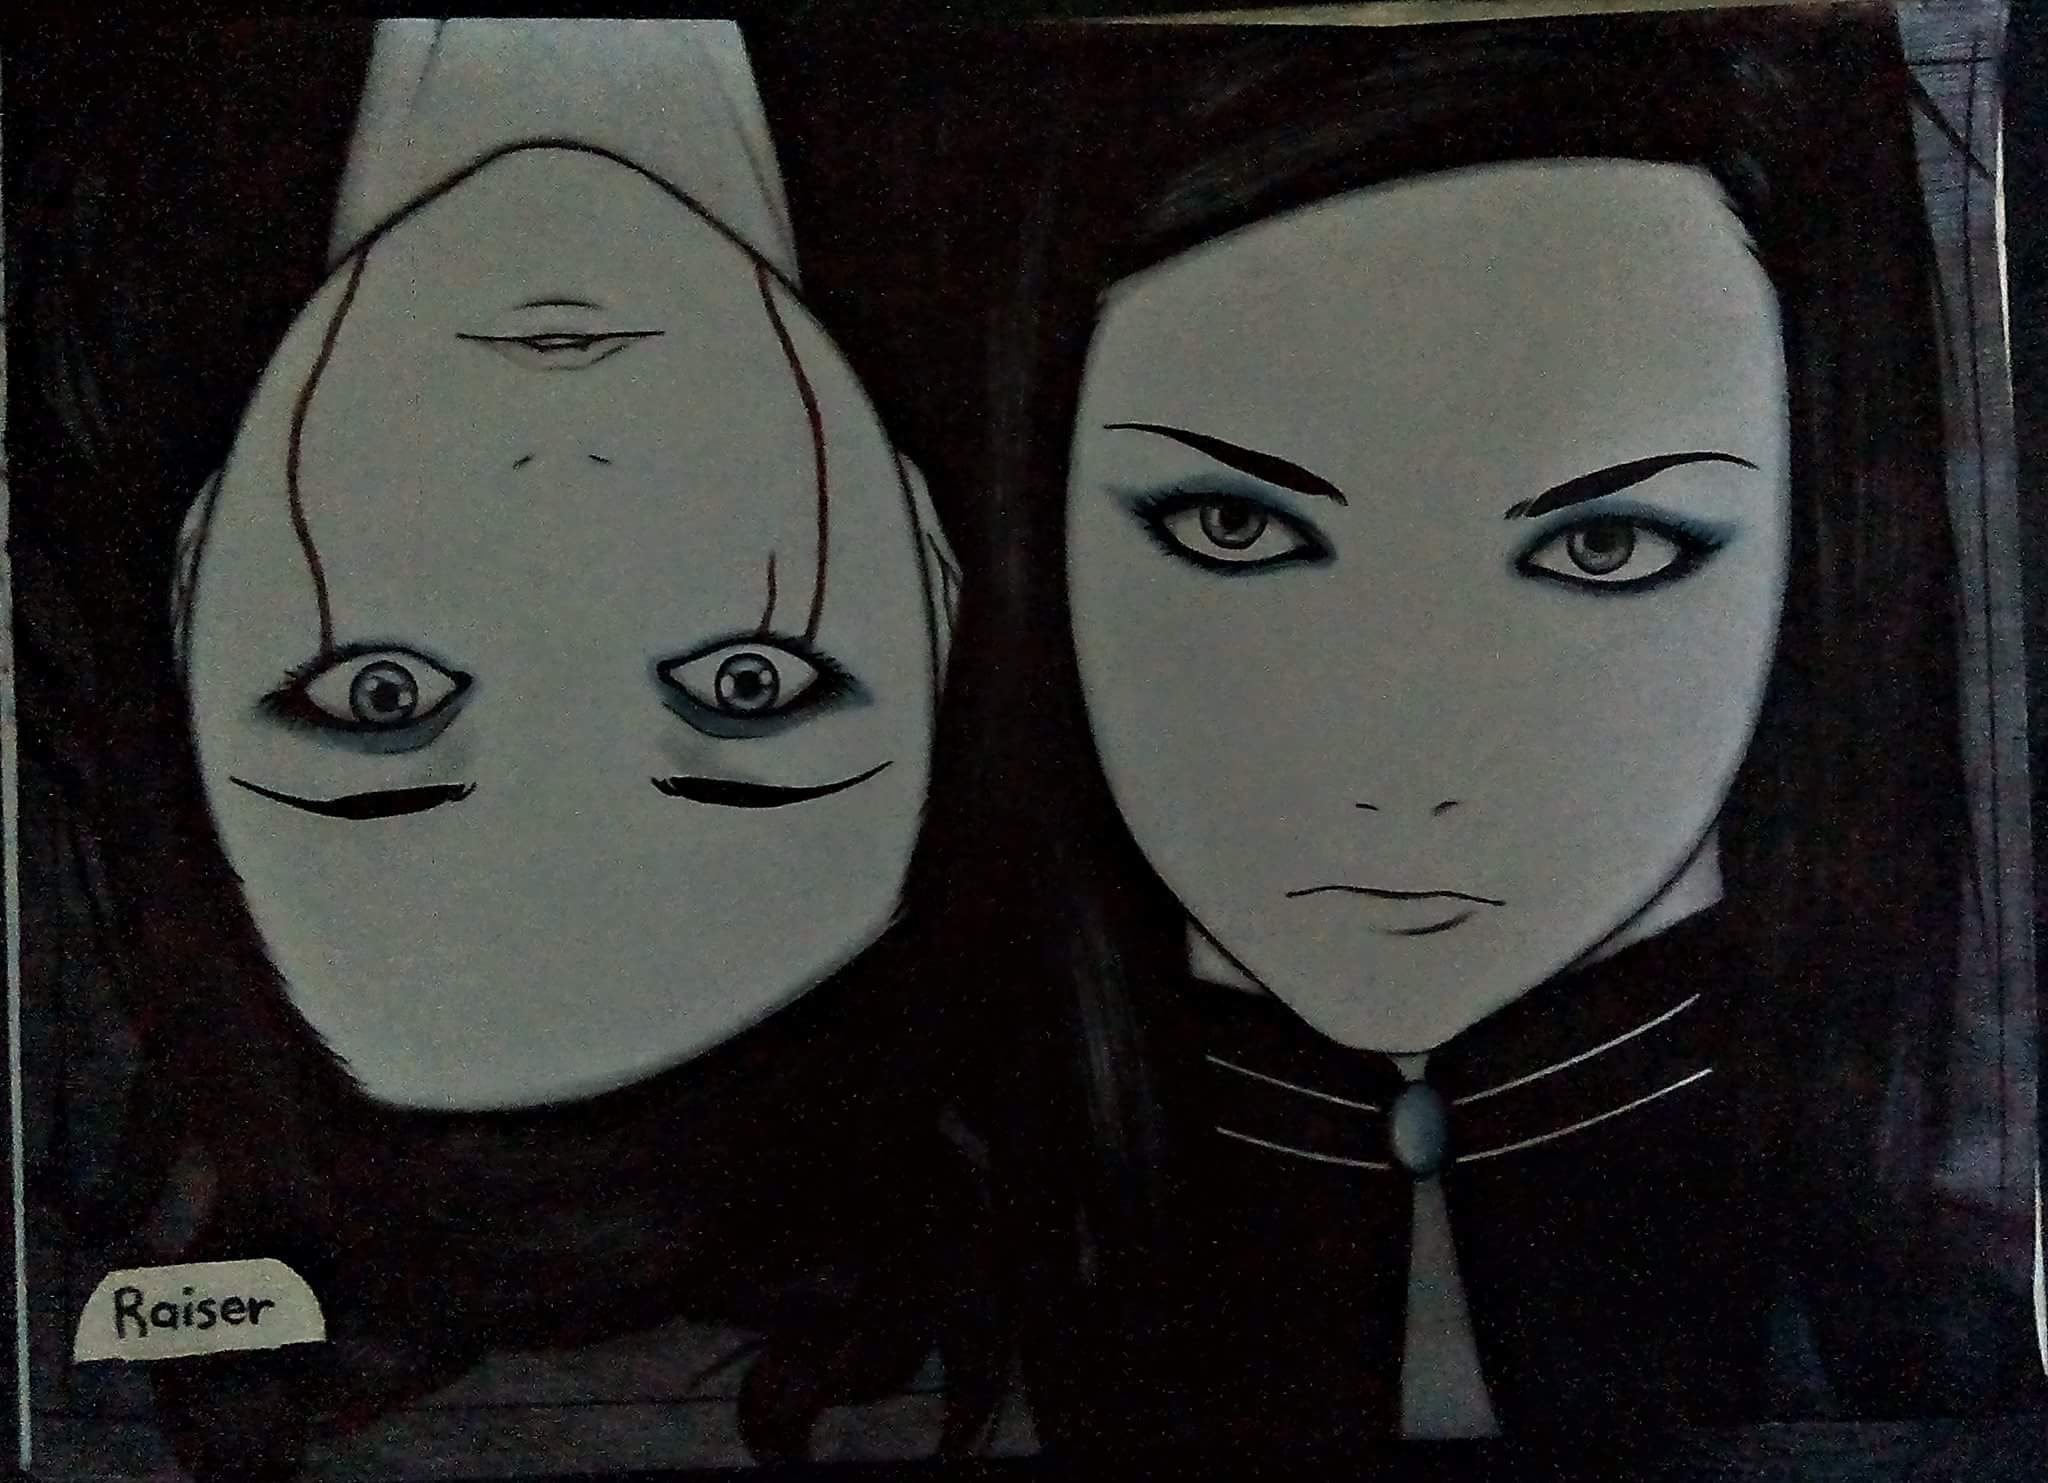 How To Draw Ergo Proxy, Re-l Mayer, Step by Step, Drawing Guide, by Dawn -  DragoArt